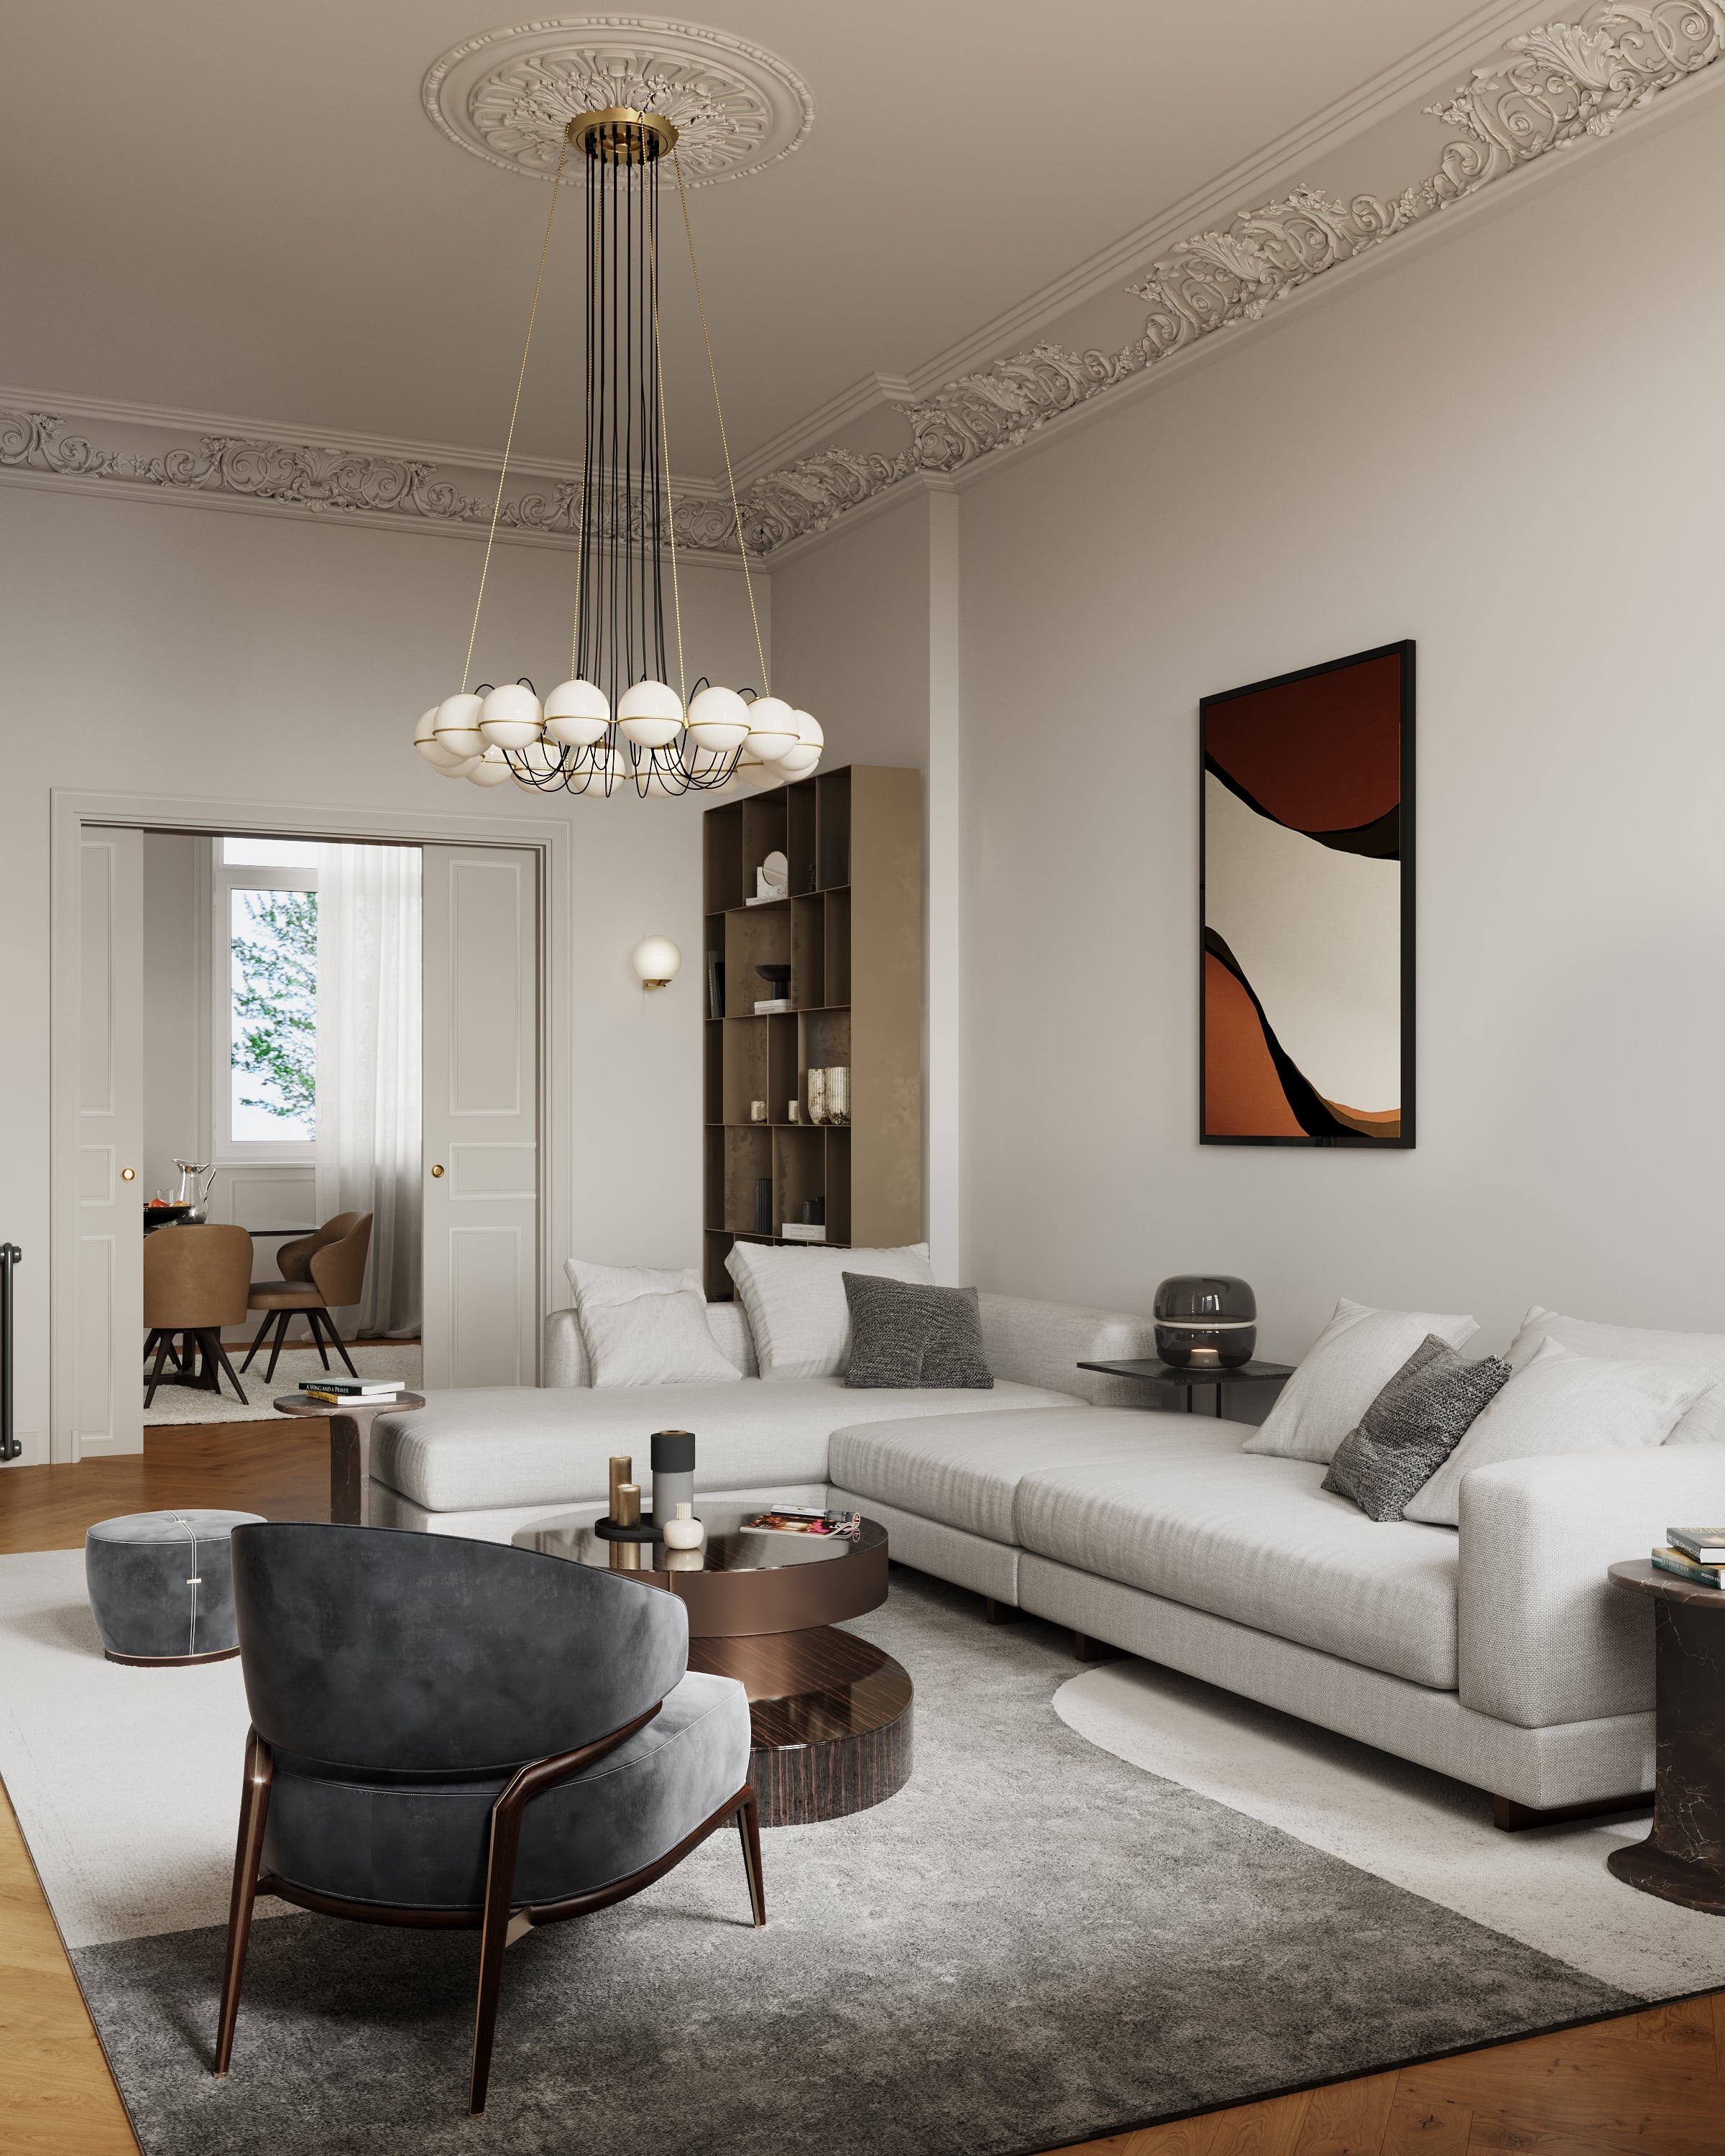 3D architectural Interior Visualization of the living room with dining room view in renovated historical apartment in Fliederstrasse, Hamburg